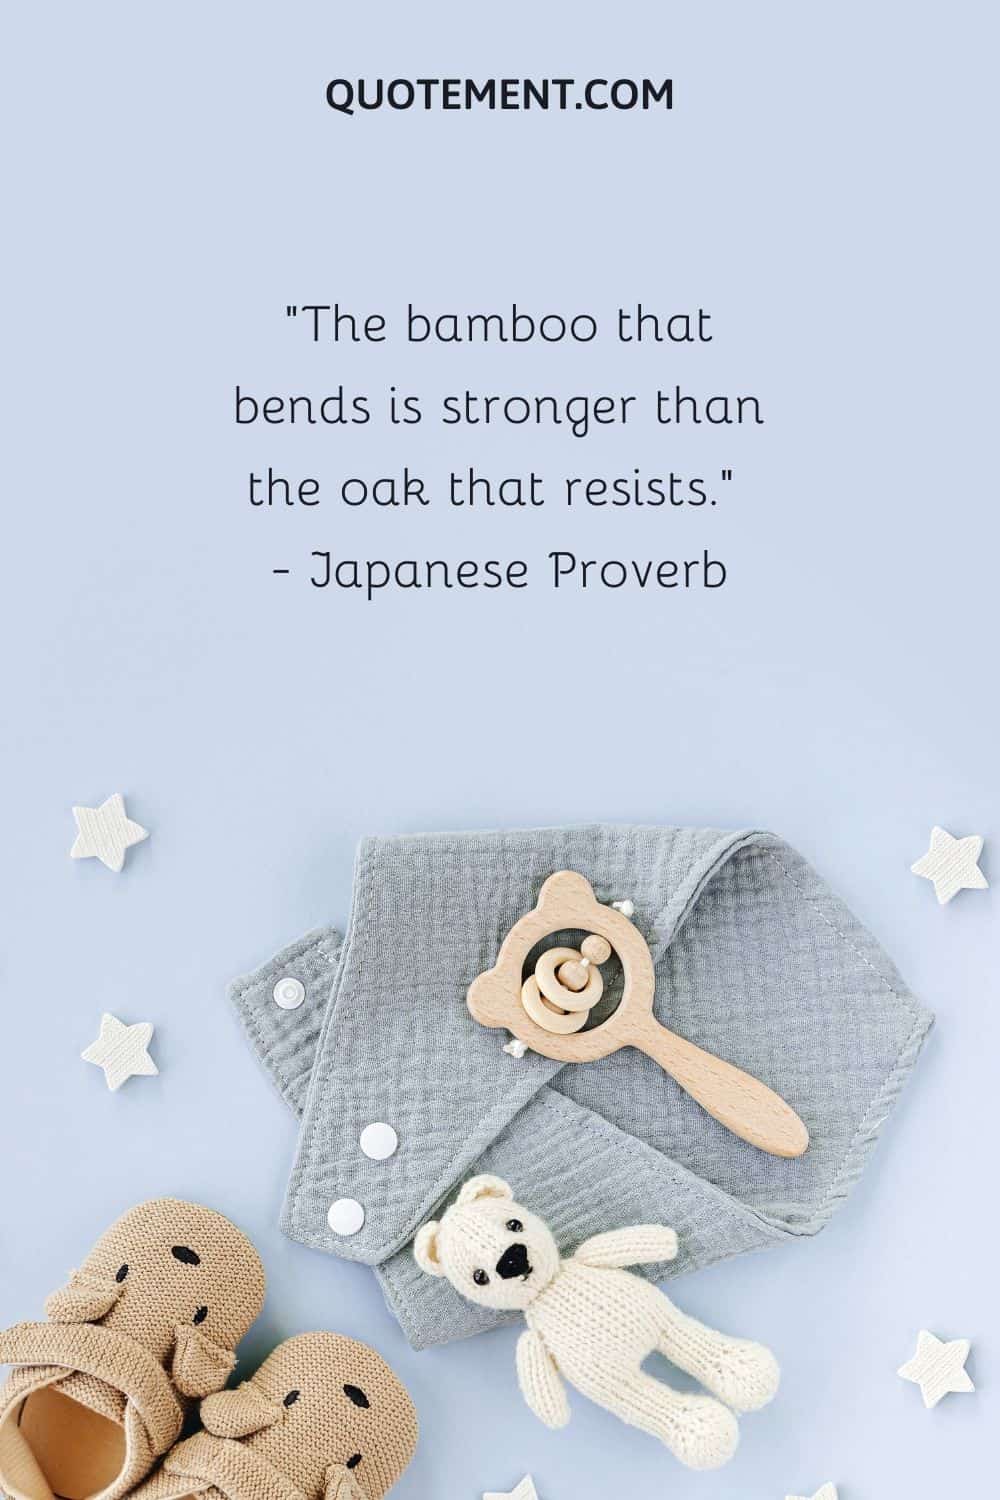 The bamboo that bends is stronger than the oak that resists